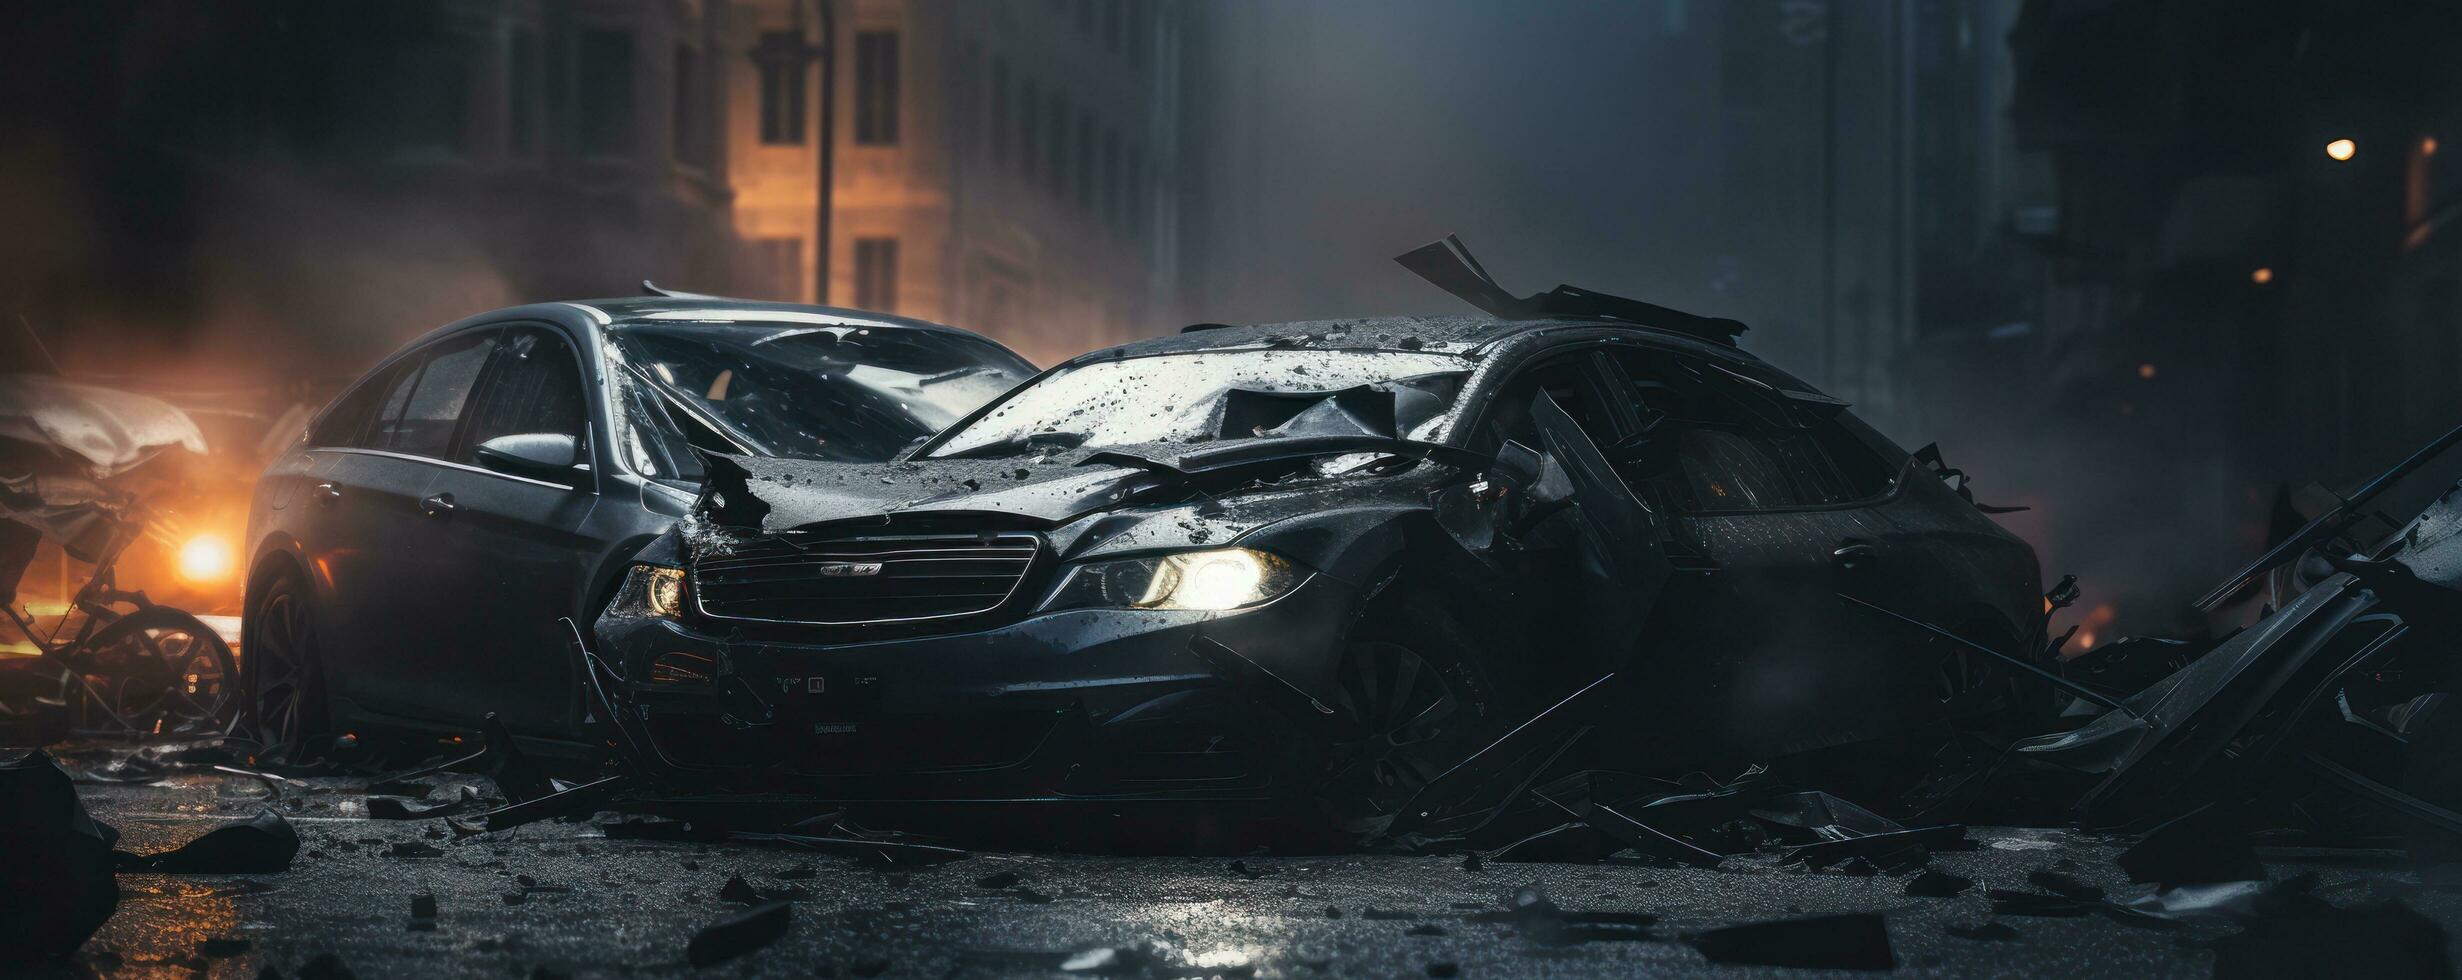 A car being damaged in the road photo